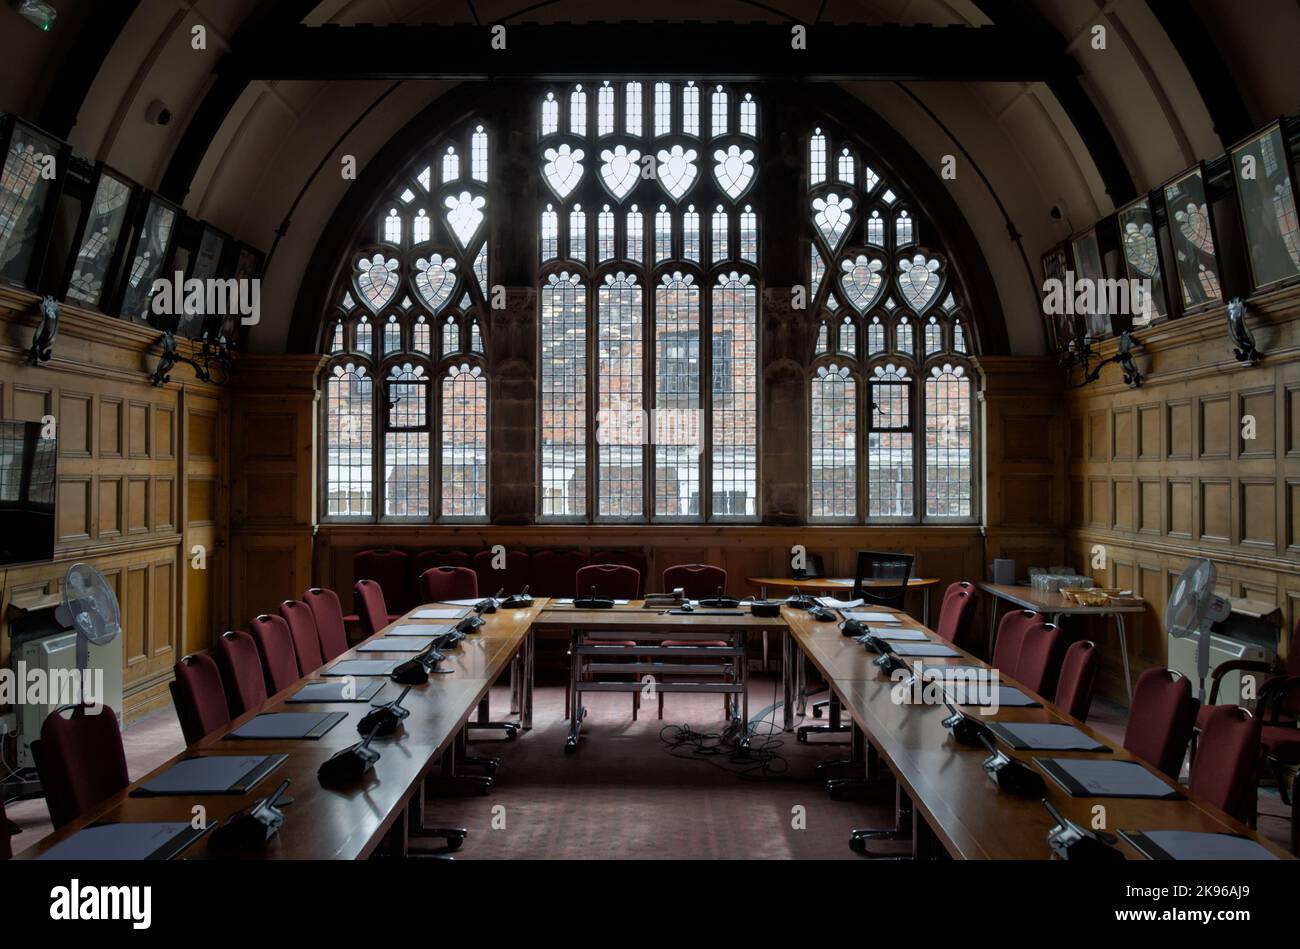 Long Tables, Chairs And Television Screens In The Councils Chamber Conference Room In The Guildhall Of The Holy And Undivided Trinity, King's Lynn, UK Stock Photo